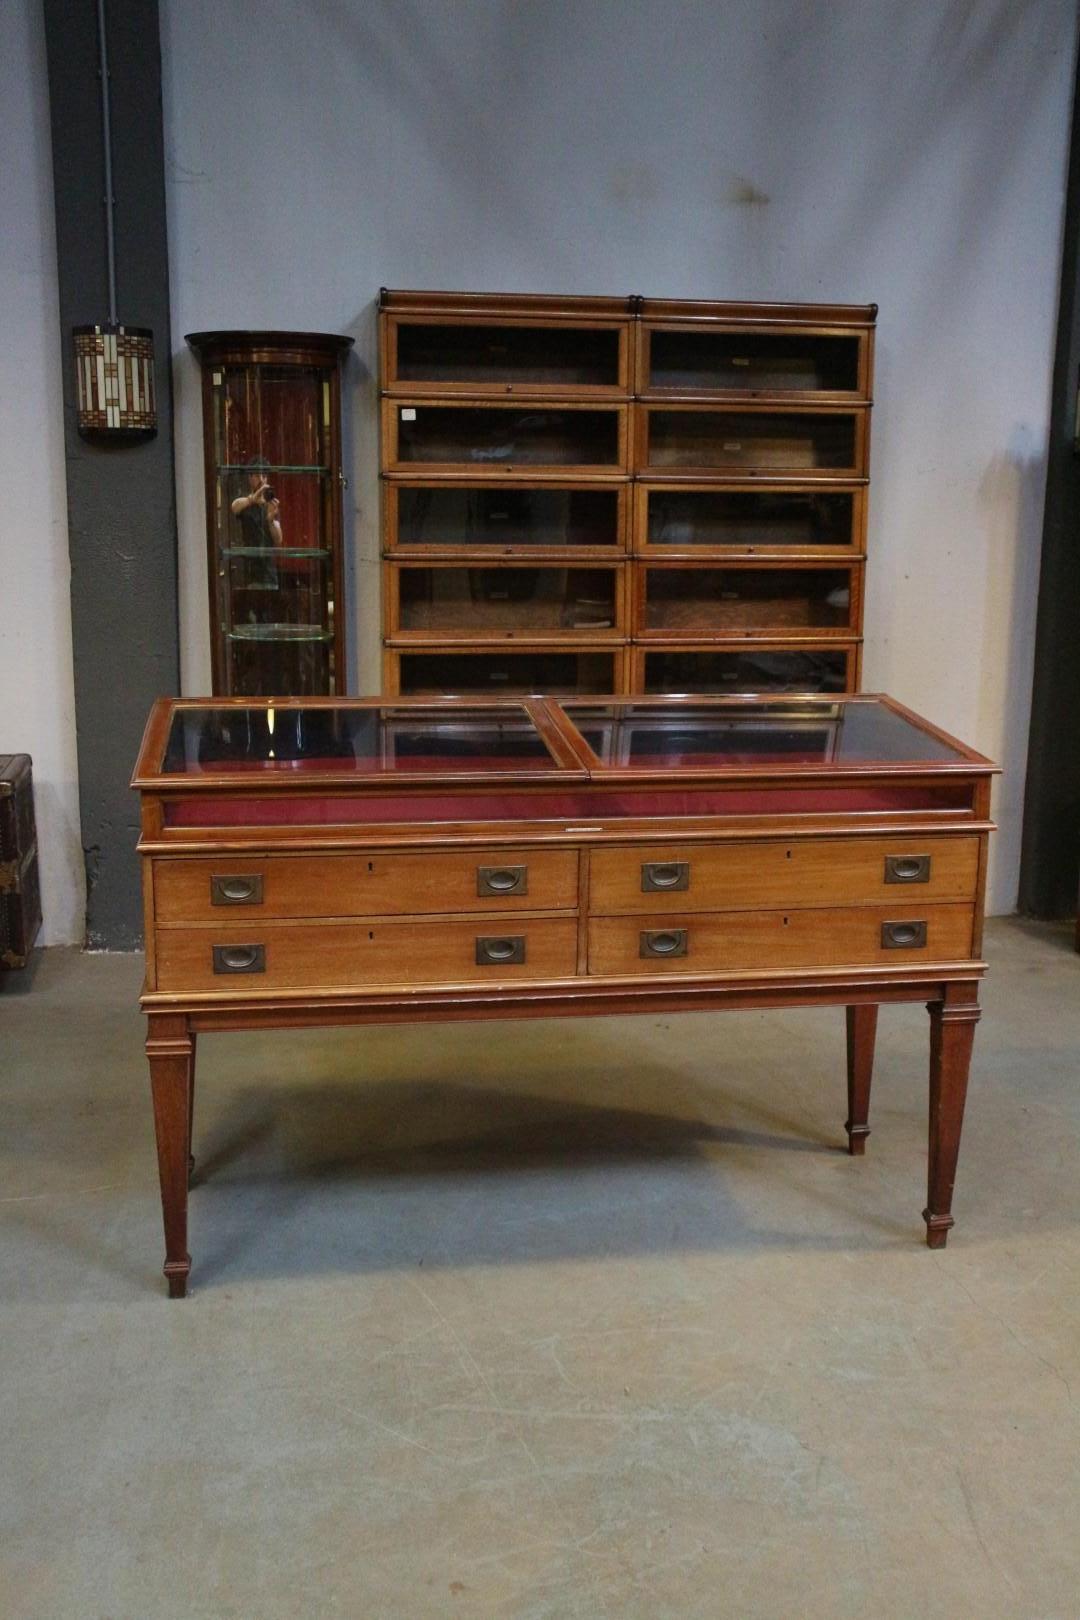 Beautiful antique mahogany display case with 2 display compartments and 4 large drawers. Entirely in original and good condition.
This display case was made by the well-known company F. Sage & Co London. This company furnished numerous large